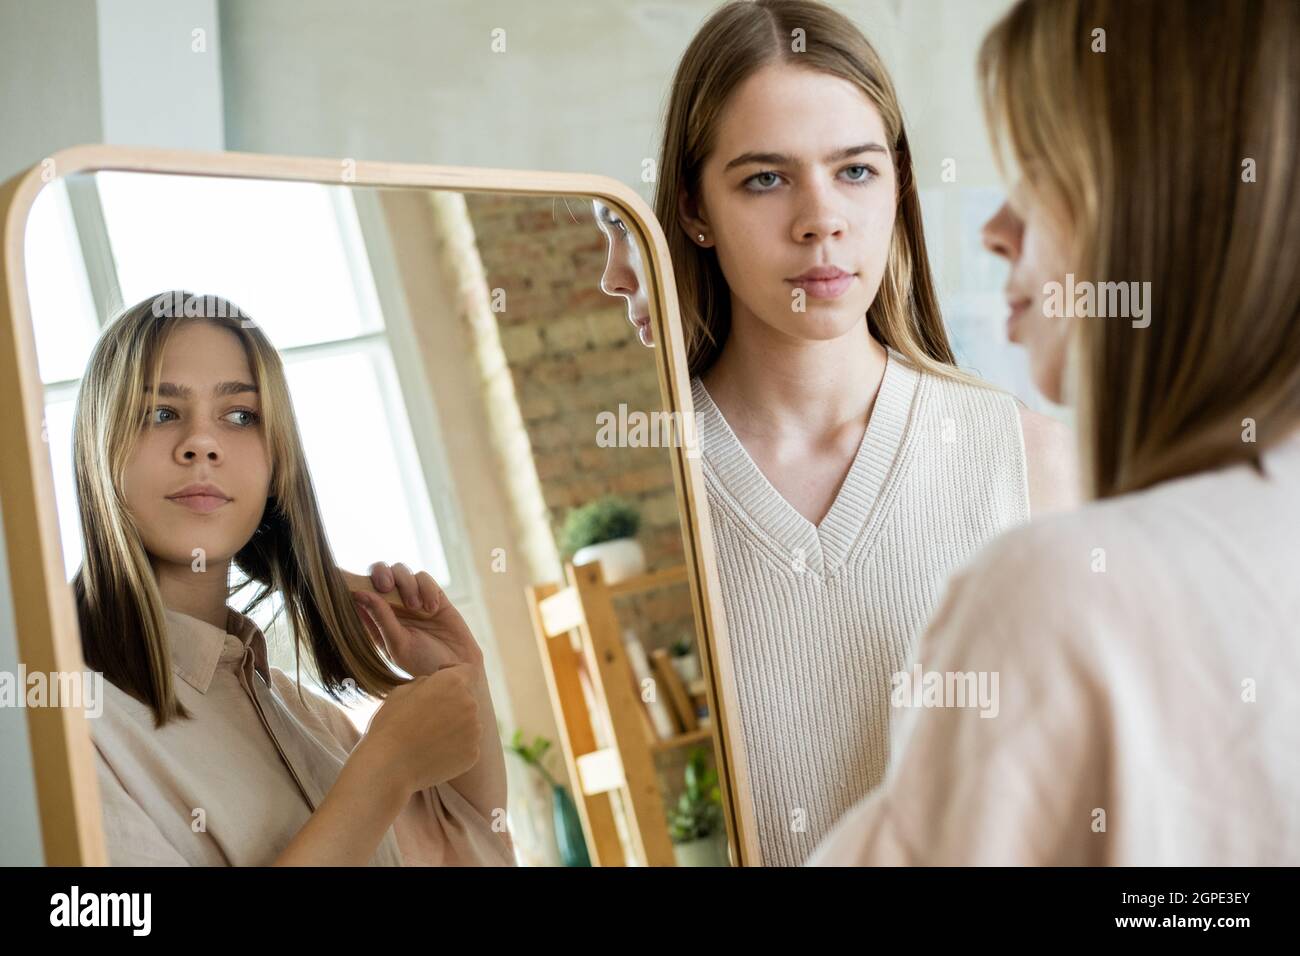 Serious teenage girl looking at her twin sister brushing hair in front of mirror Stock Photo